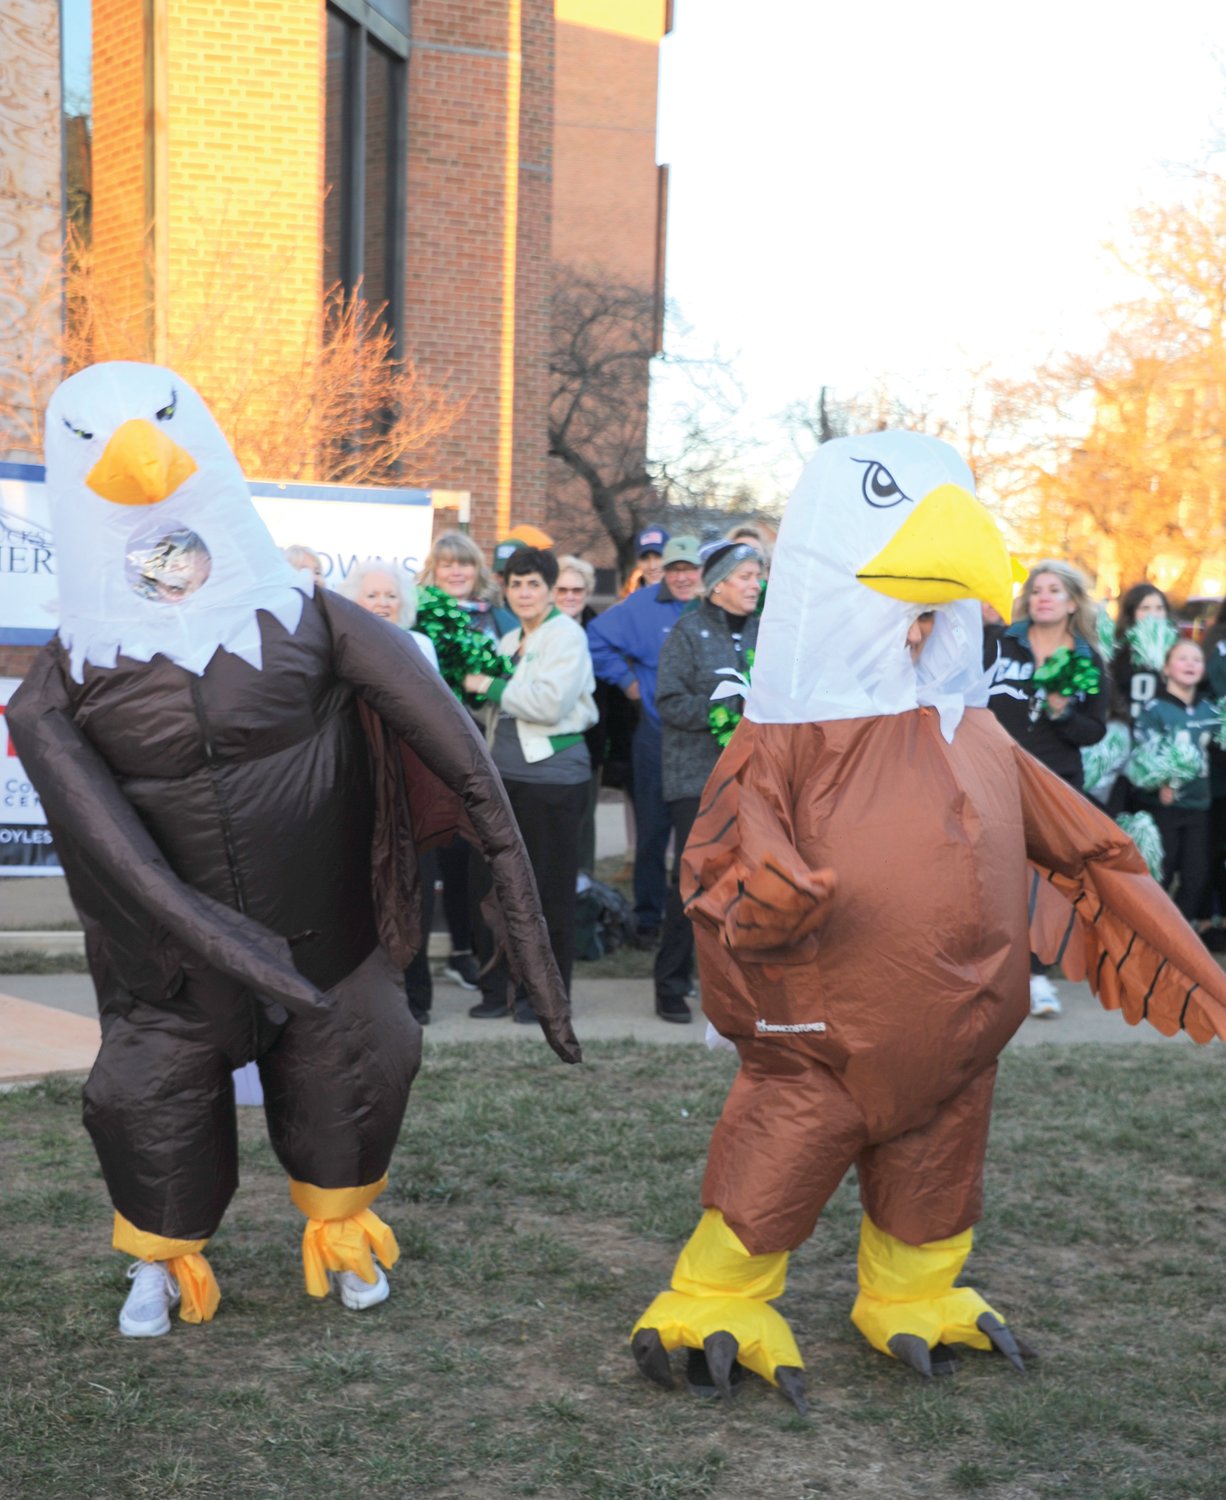 A couple of inflatable Birds joined the festivities Friday at the Herald’s “Bucks County Loves the Birds” pep rally on the lawn of the old county courthouse in Doylestown.